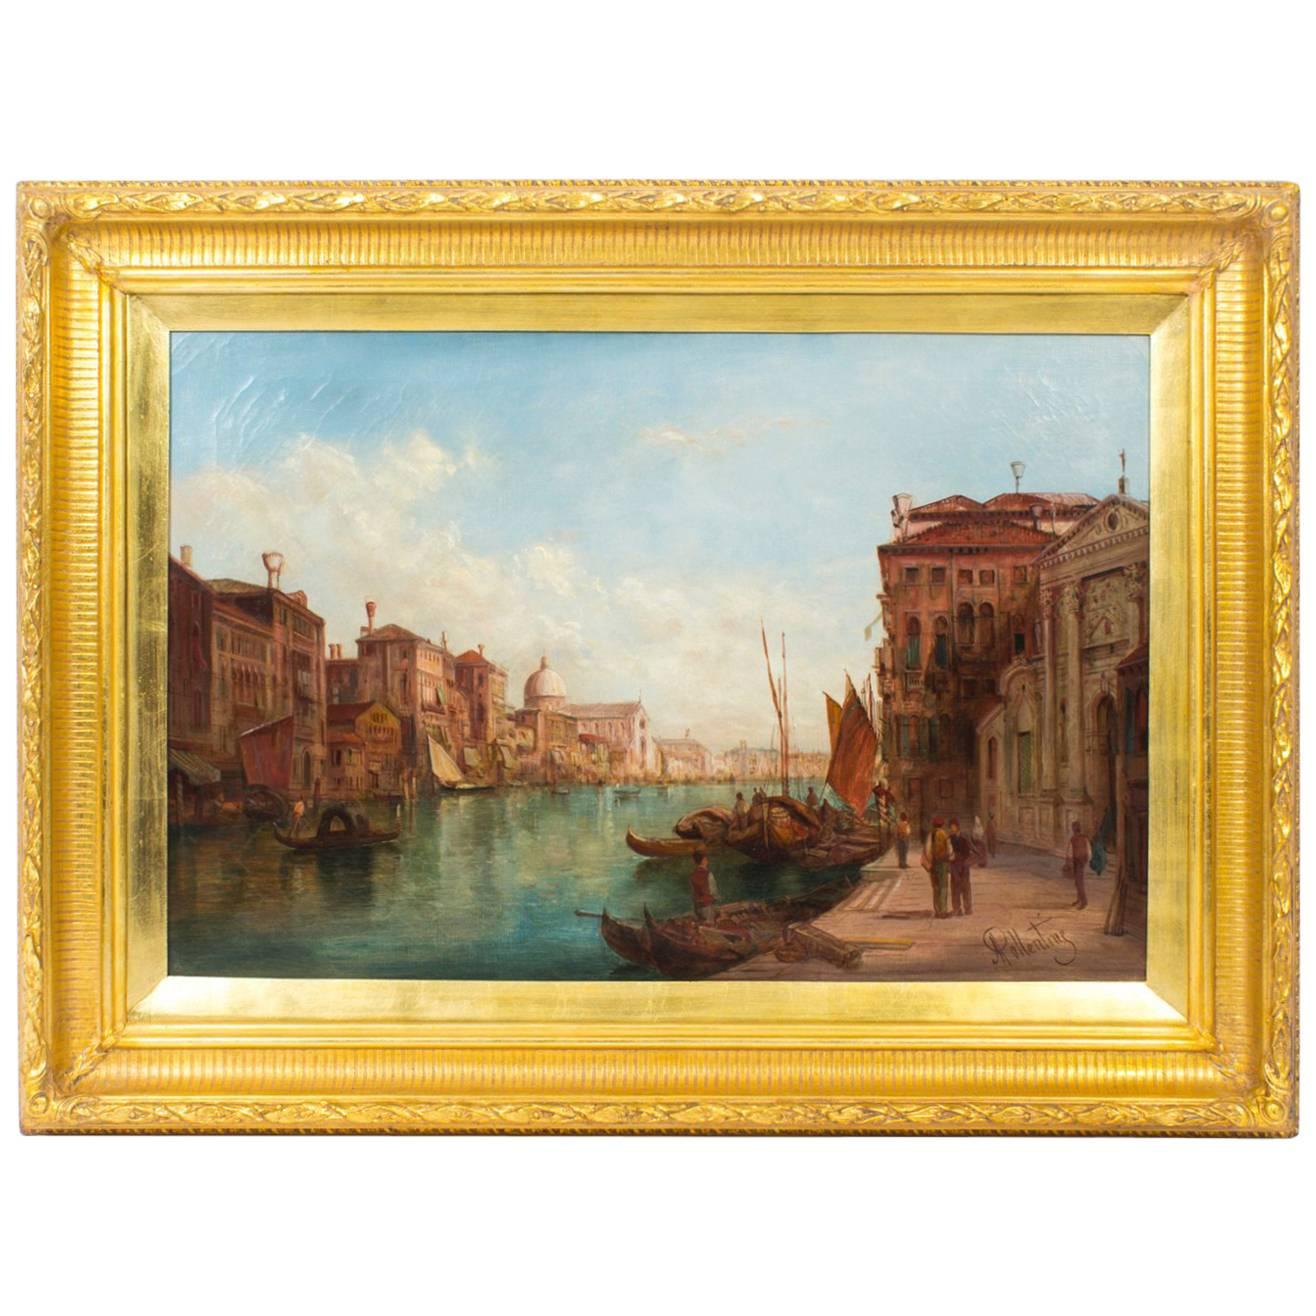 Antique Oil Painting Grand Canal Venice Alfred Pollentine, 19th Century